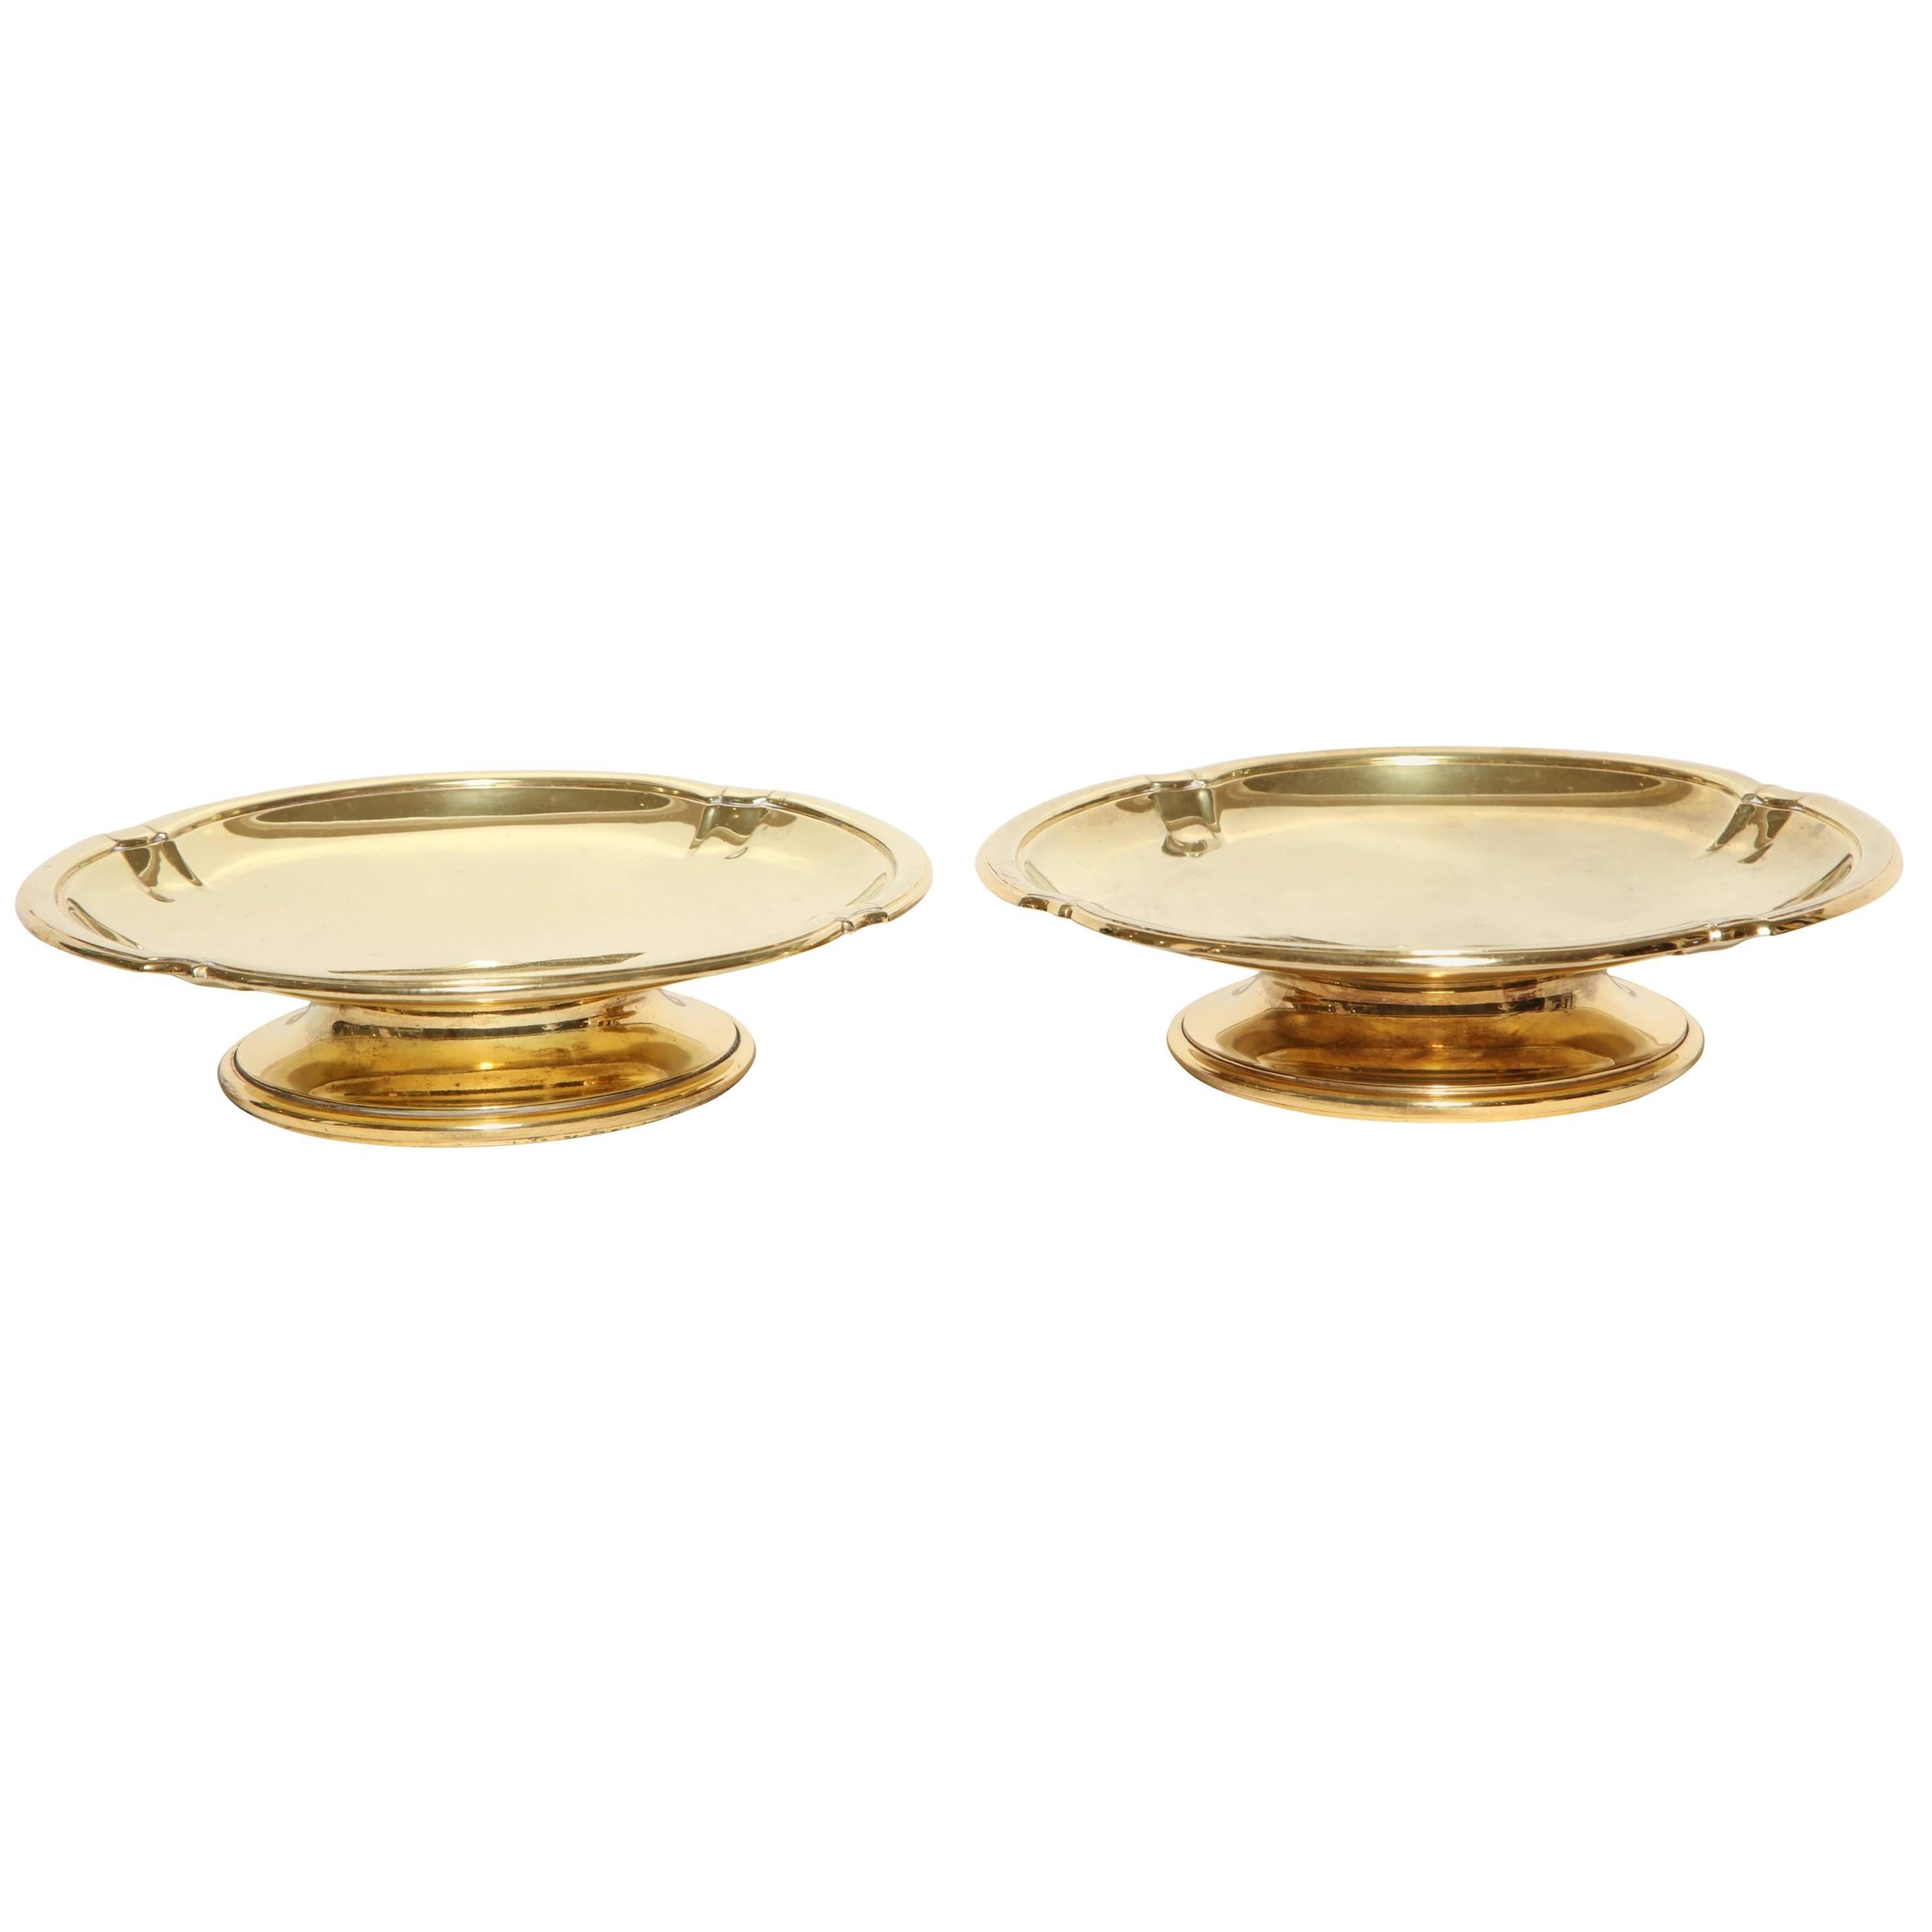 Gustave Keller Freres French Art Deco Pair of Vermeil Footed Tazzas/Centrepieces For Sale